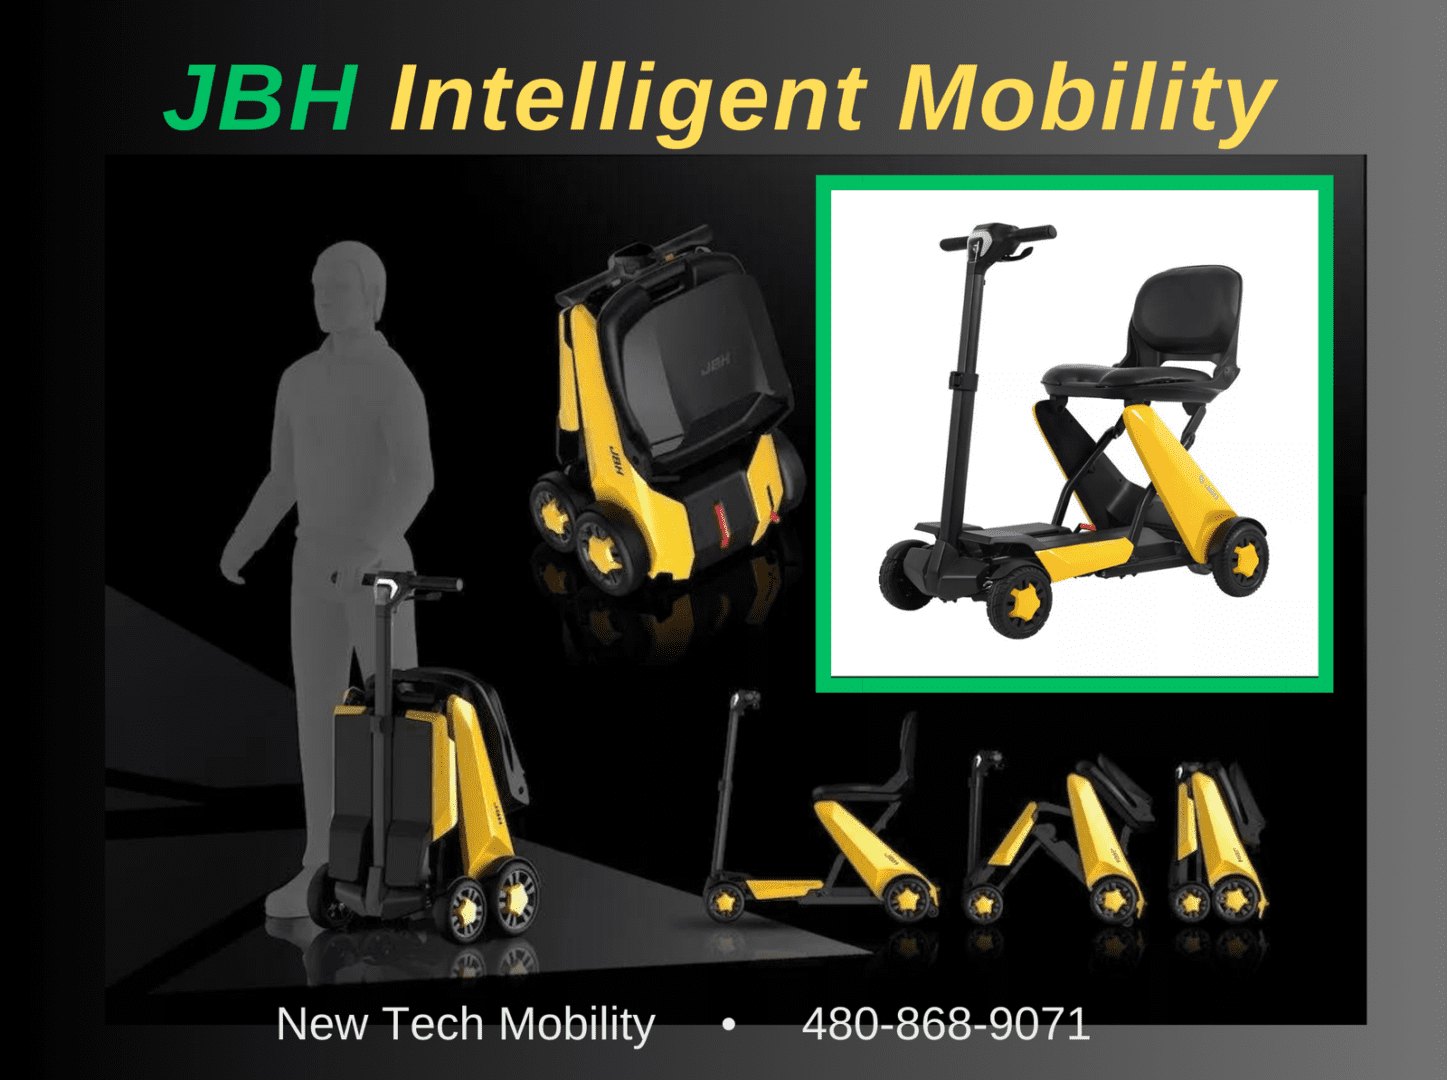 Yellow and black JBH Intelligent Mobility scooter.